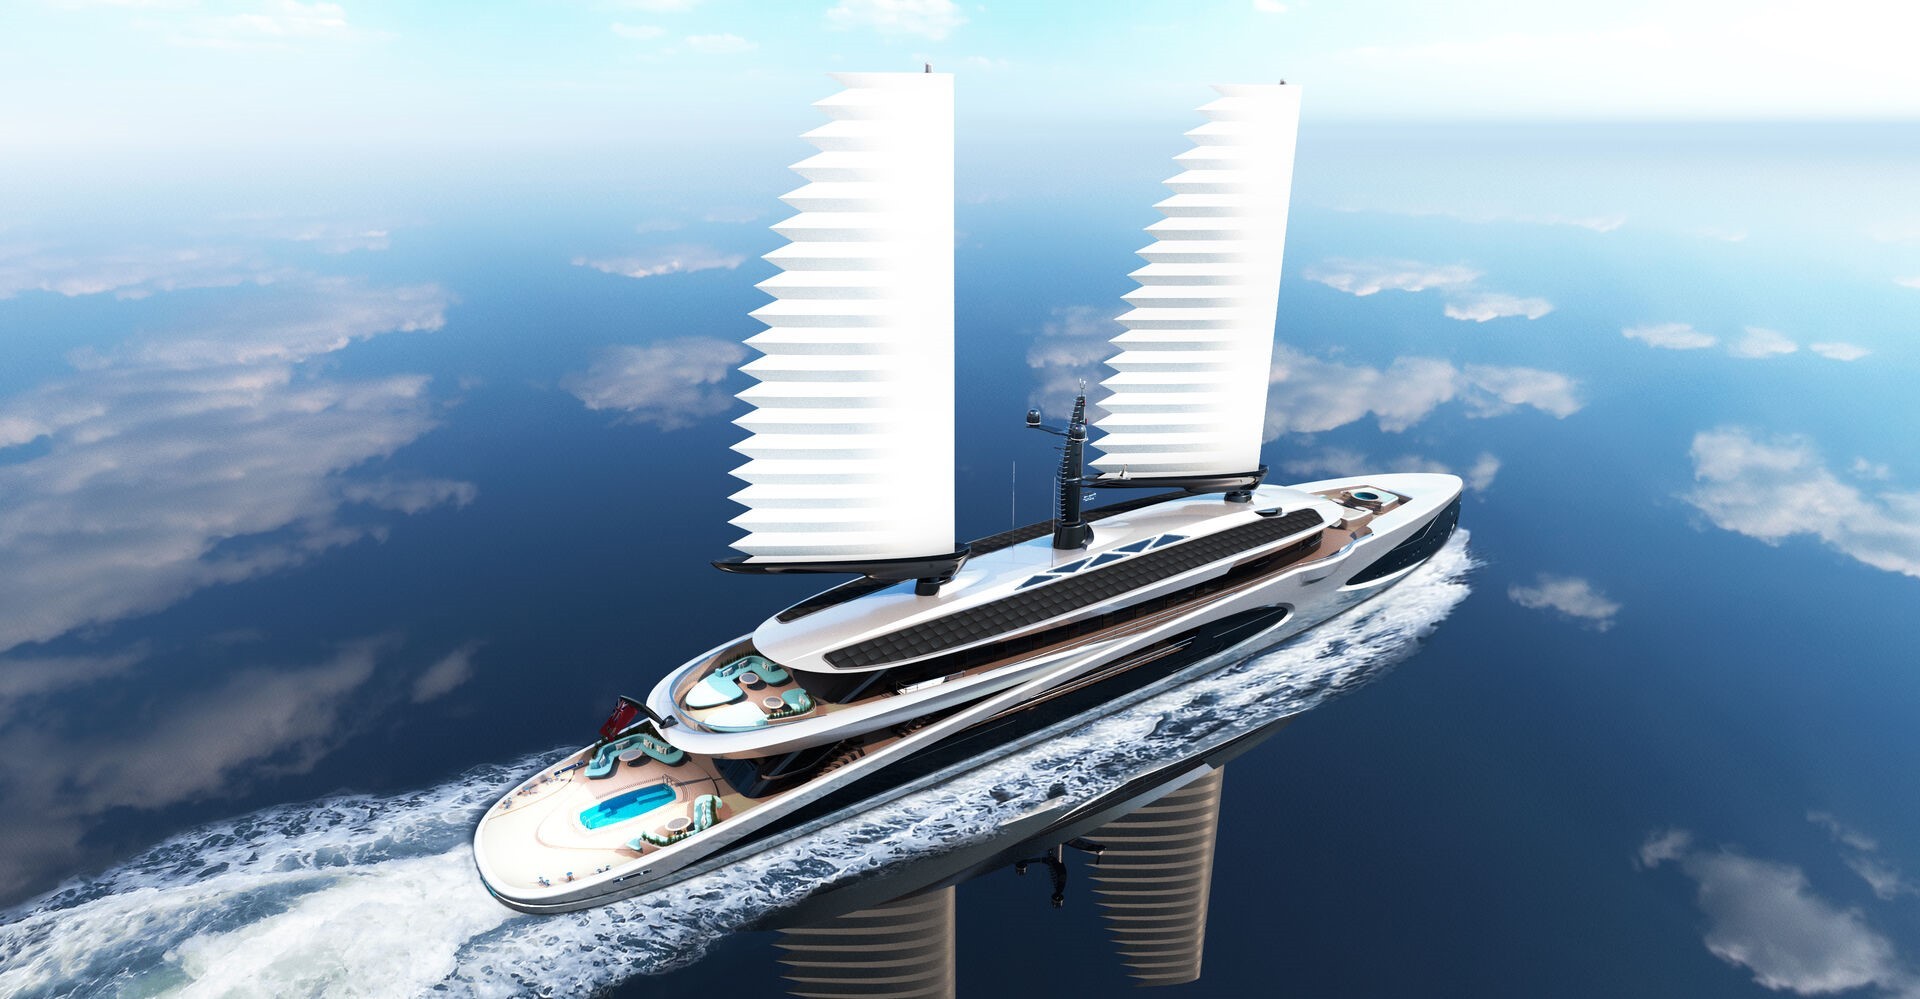 amplitude is a futuristic superyacht concept with massive sail wings for fuel efficiency 8